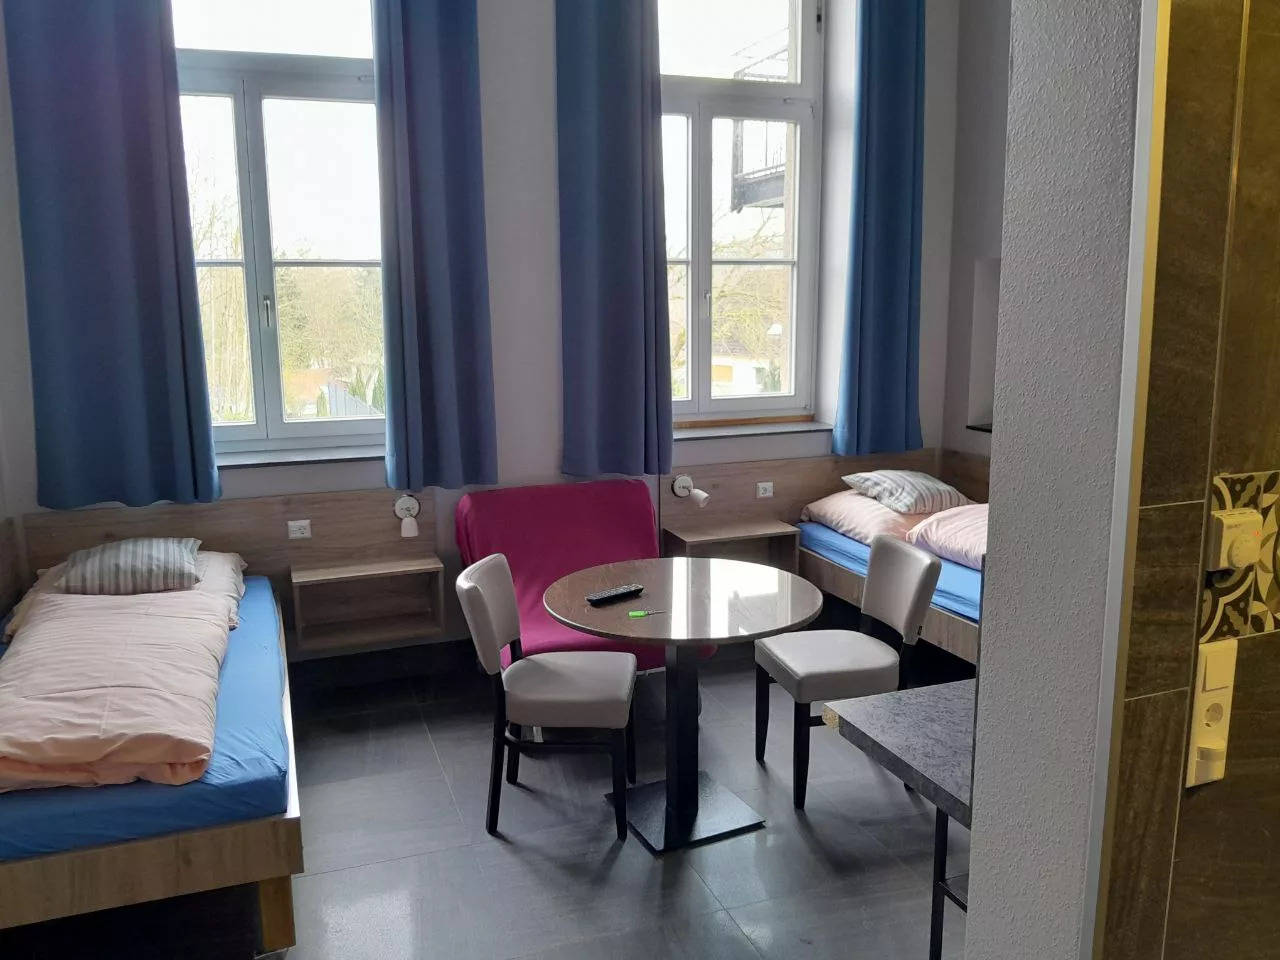 Double room with bathroom and kitchenette in Solingen